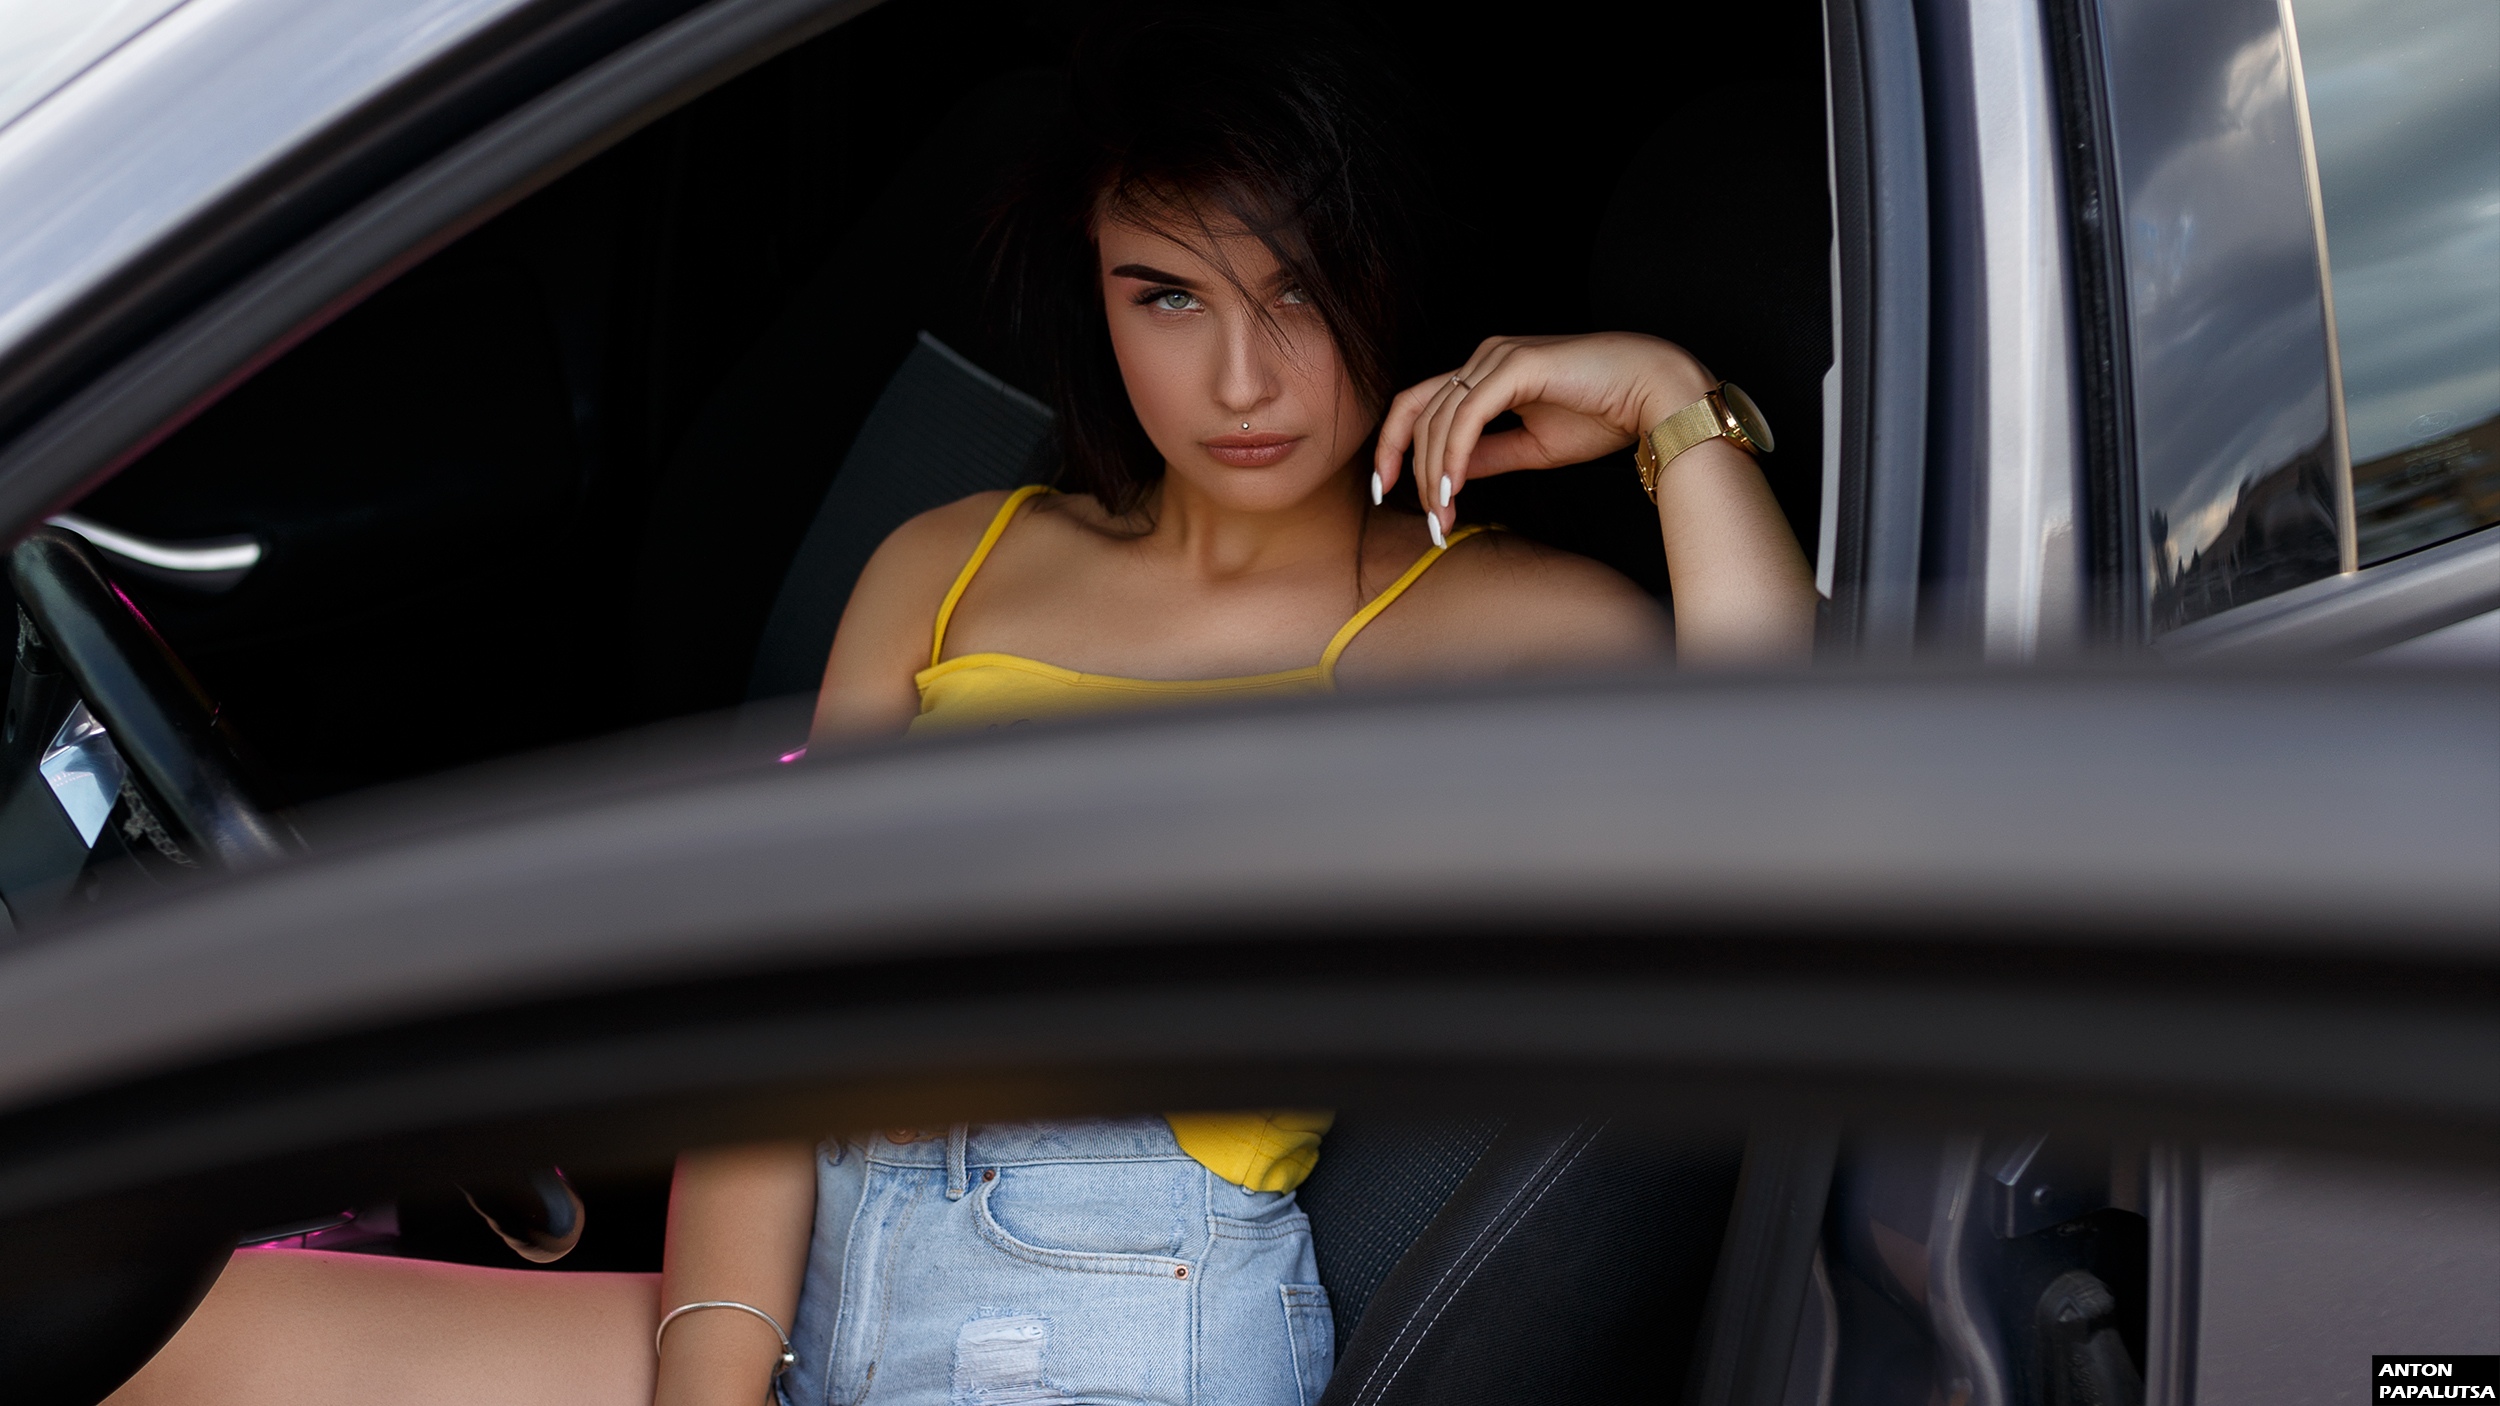 Women Model Inside A Car Yellow Tops Brunette Looking At Viewer White Nails Watch Sitting Anton Papa 2500x1406